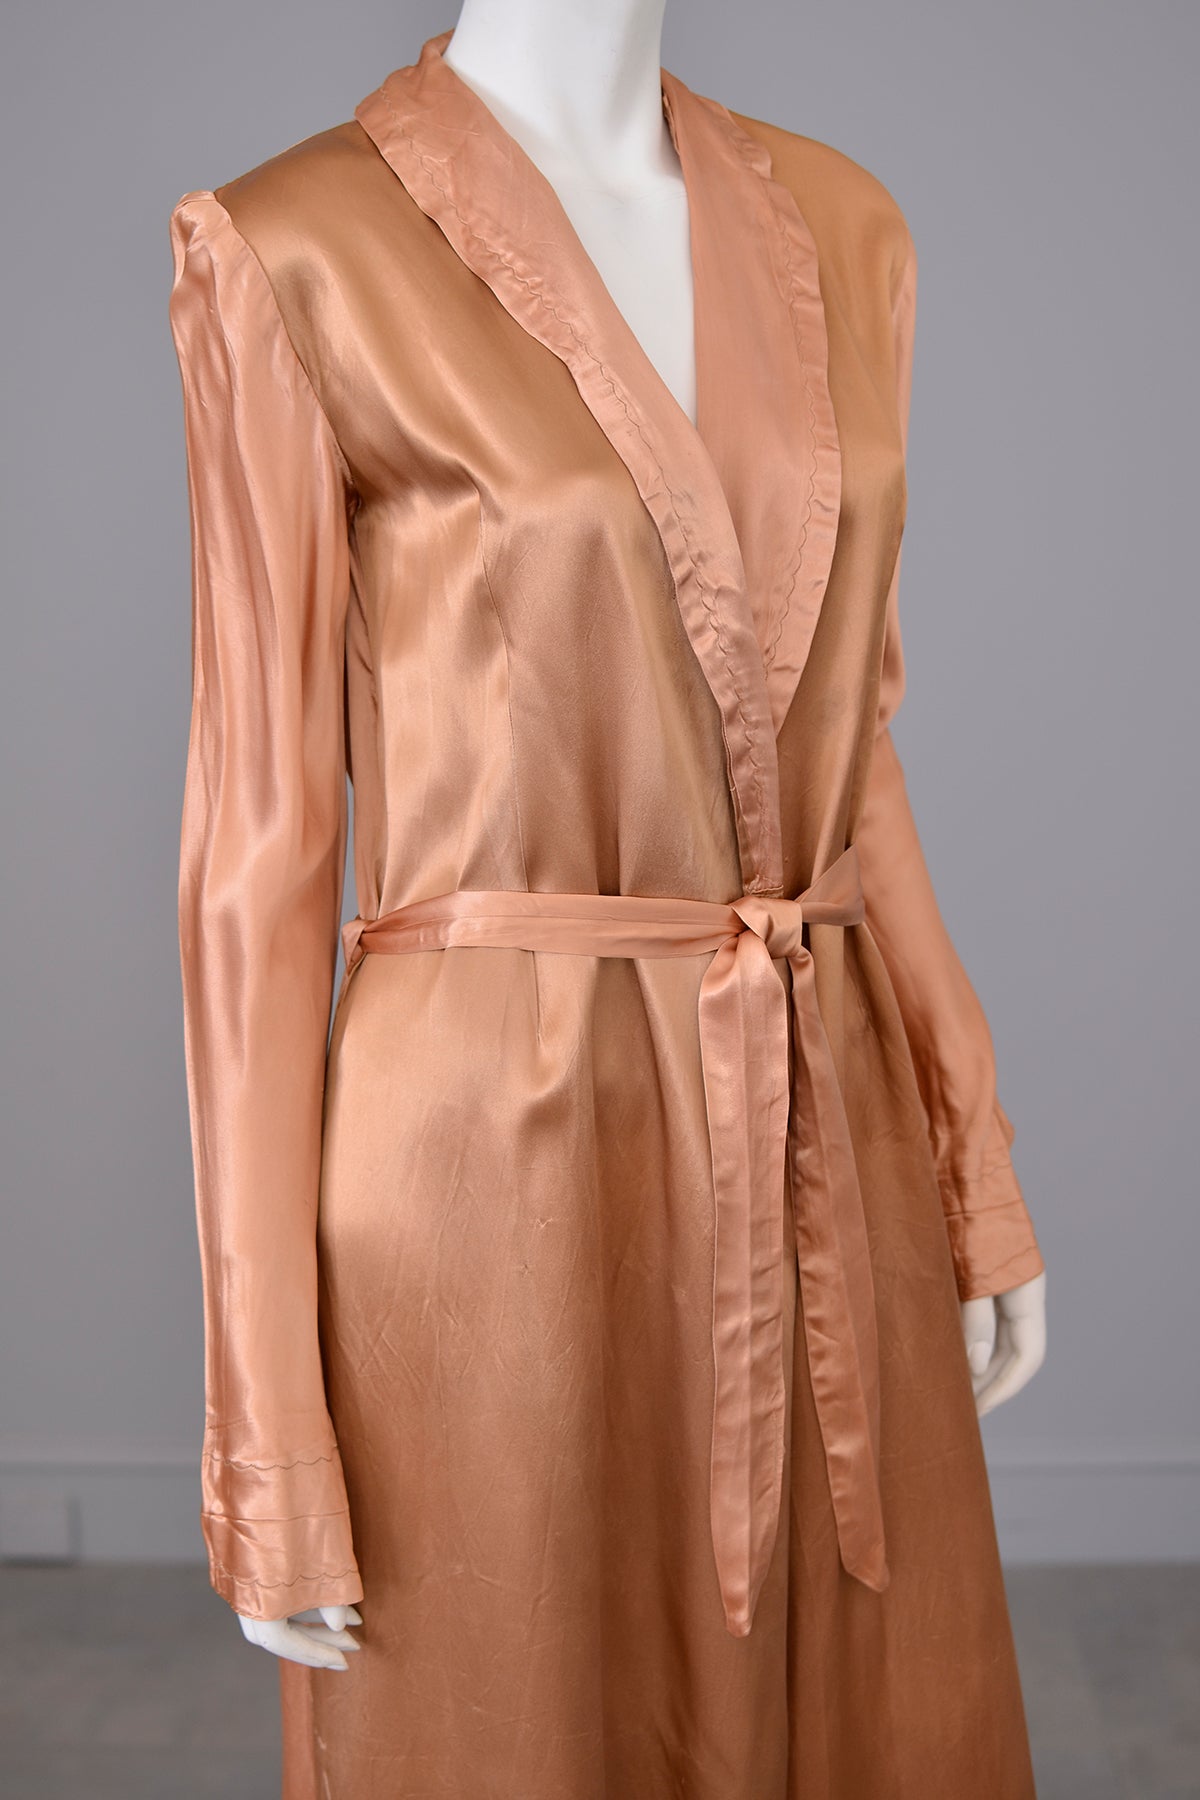 1940s Copper Satin Lounging Robe